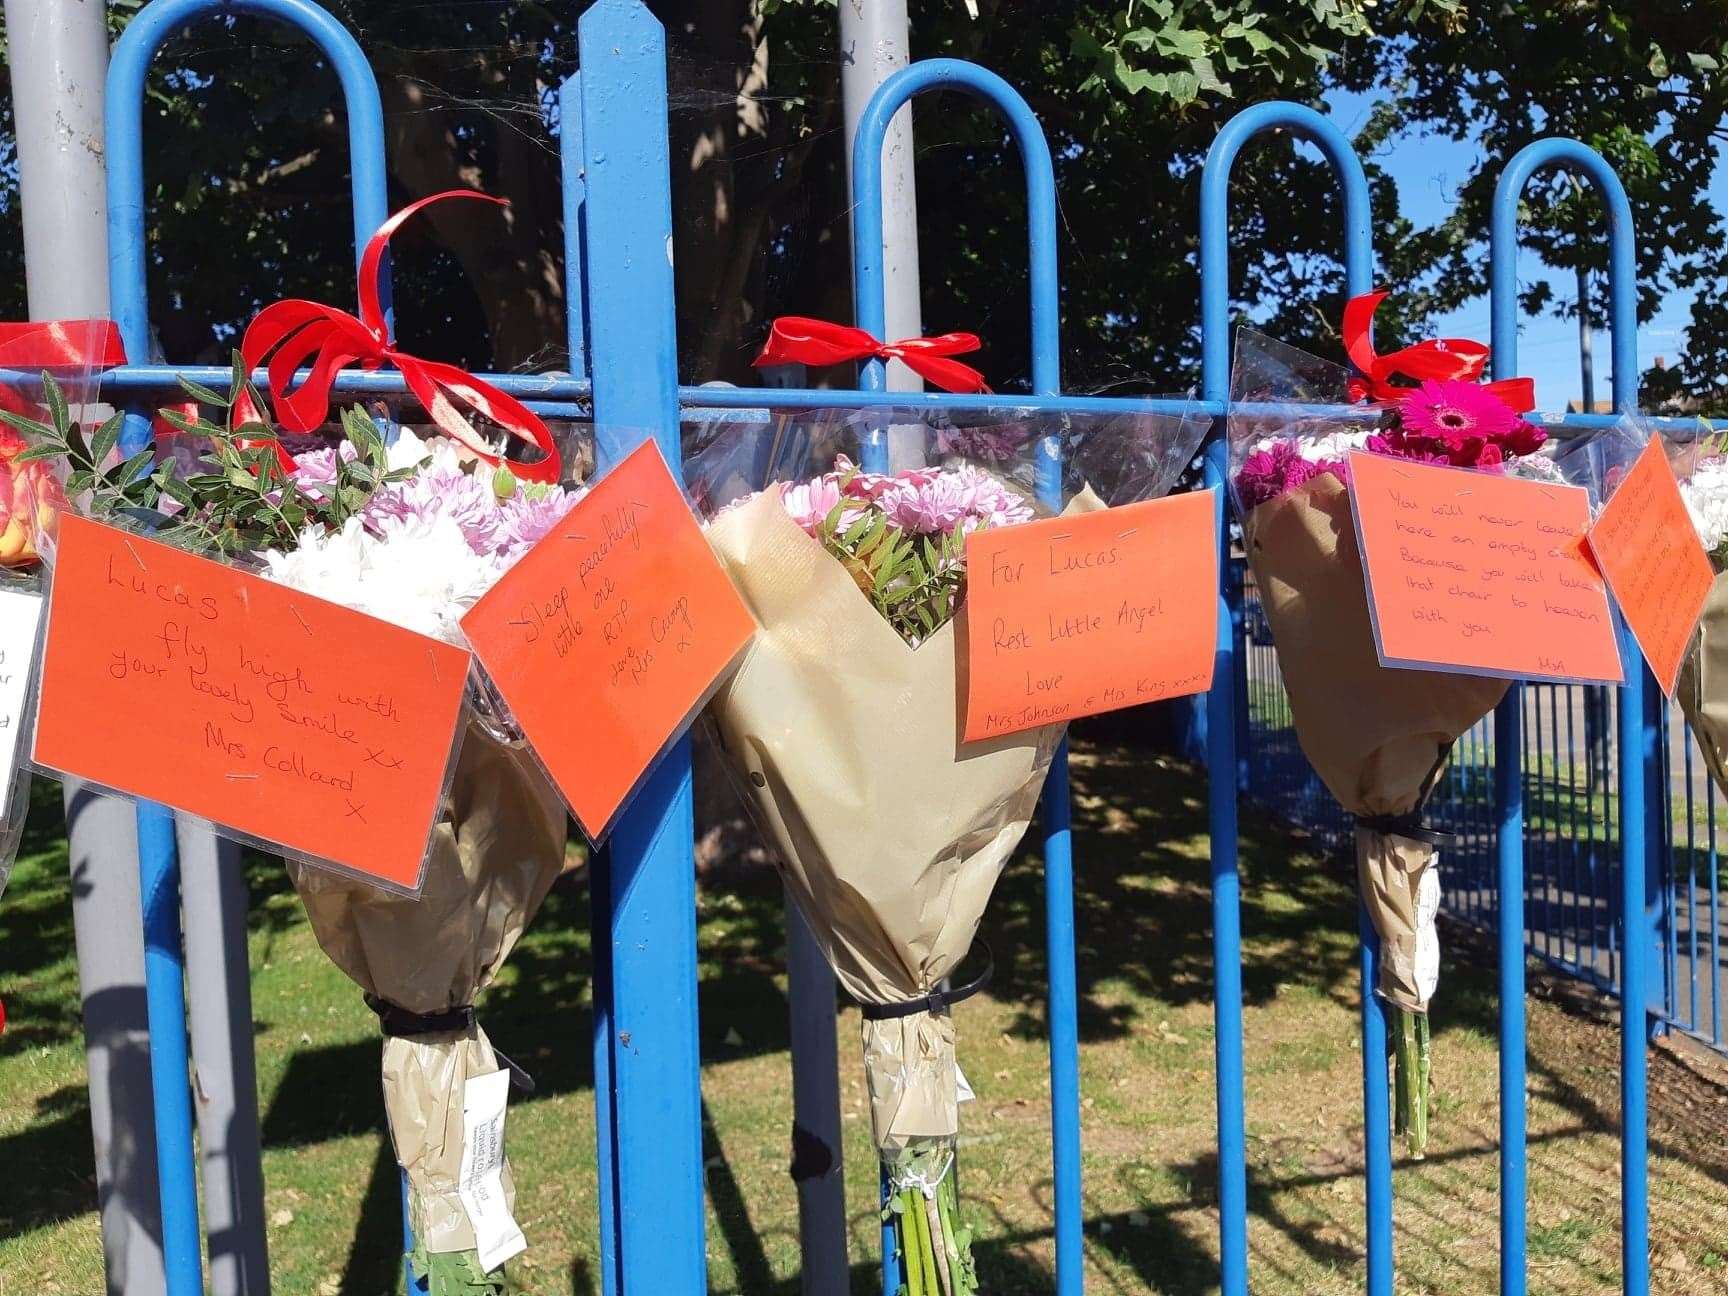 Staff at Warden House Primary in Deal leave messages to Lucas at the school's entrance